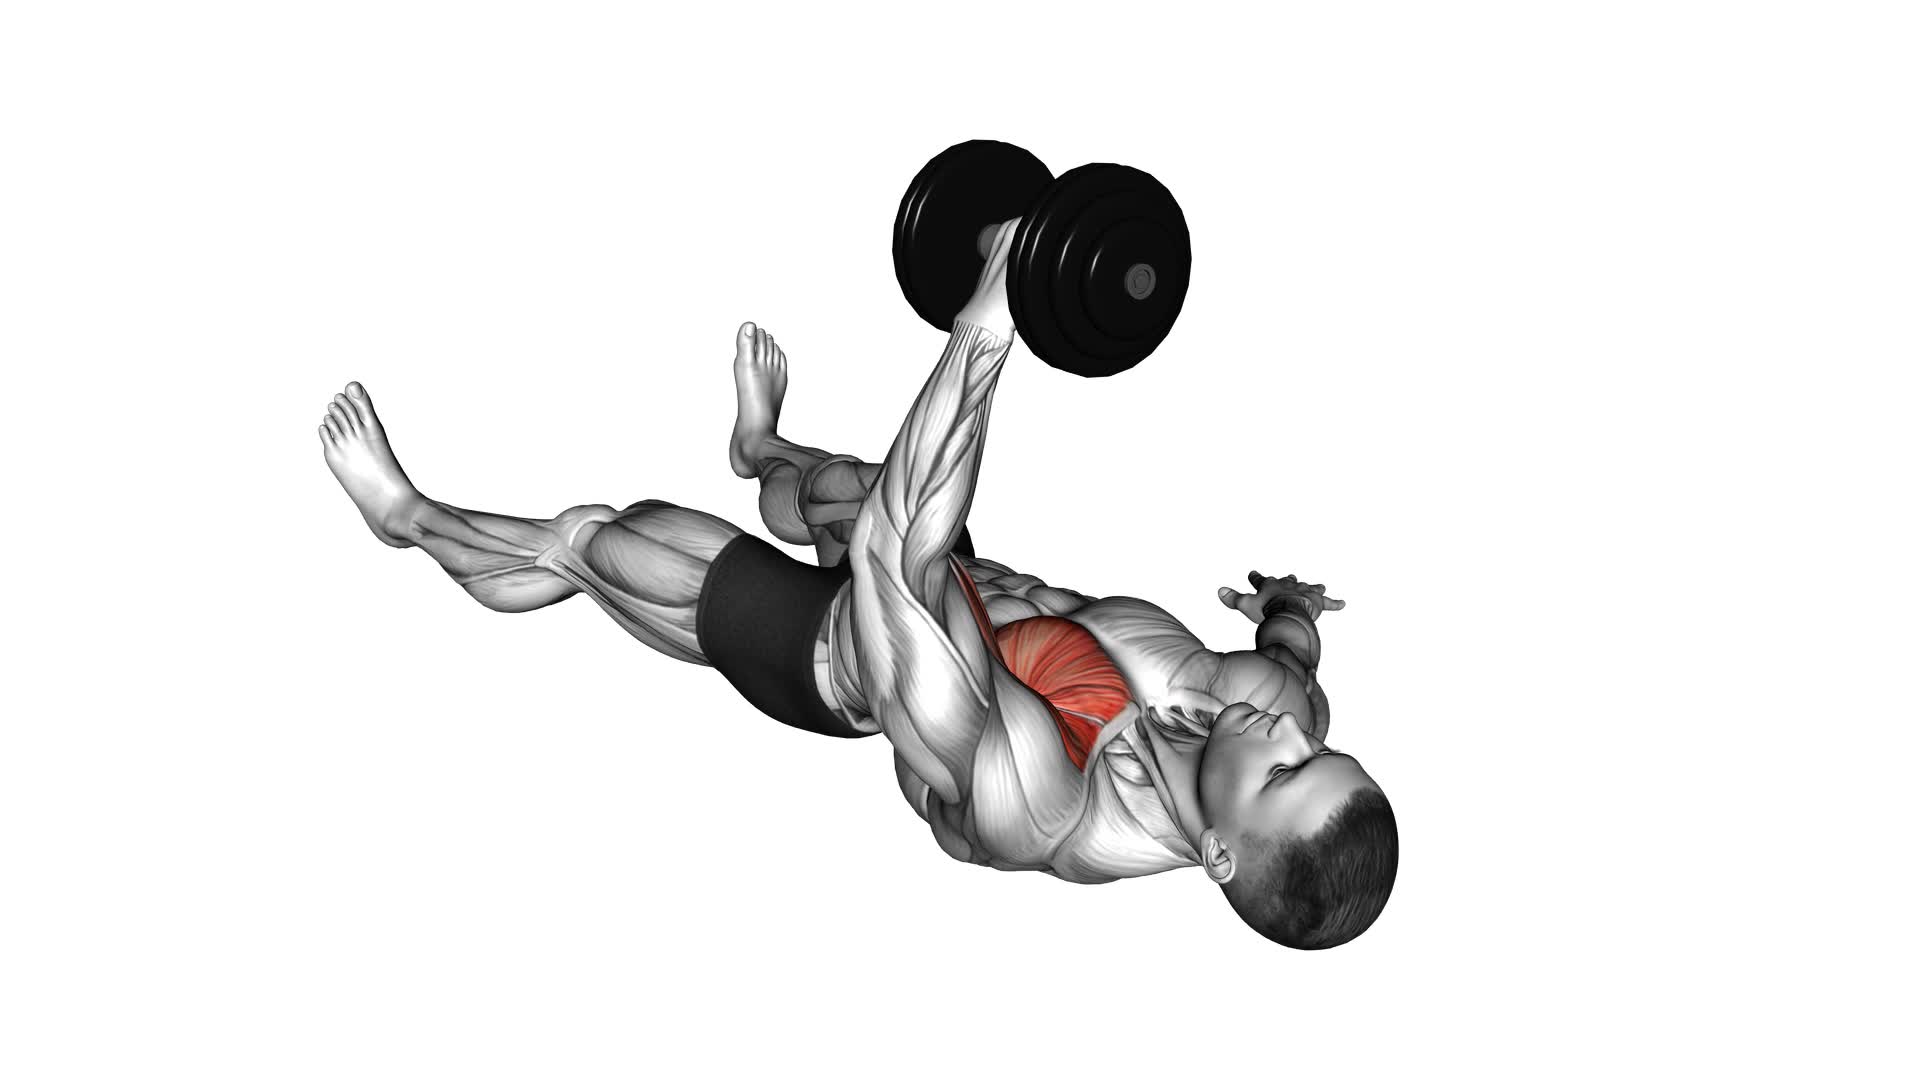 Dumbbell One Arm Floor Fly - Video Exercise Guide & Tips